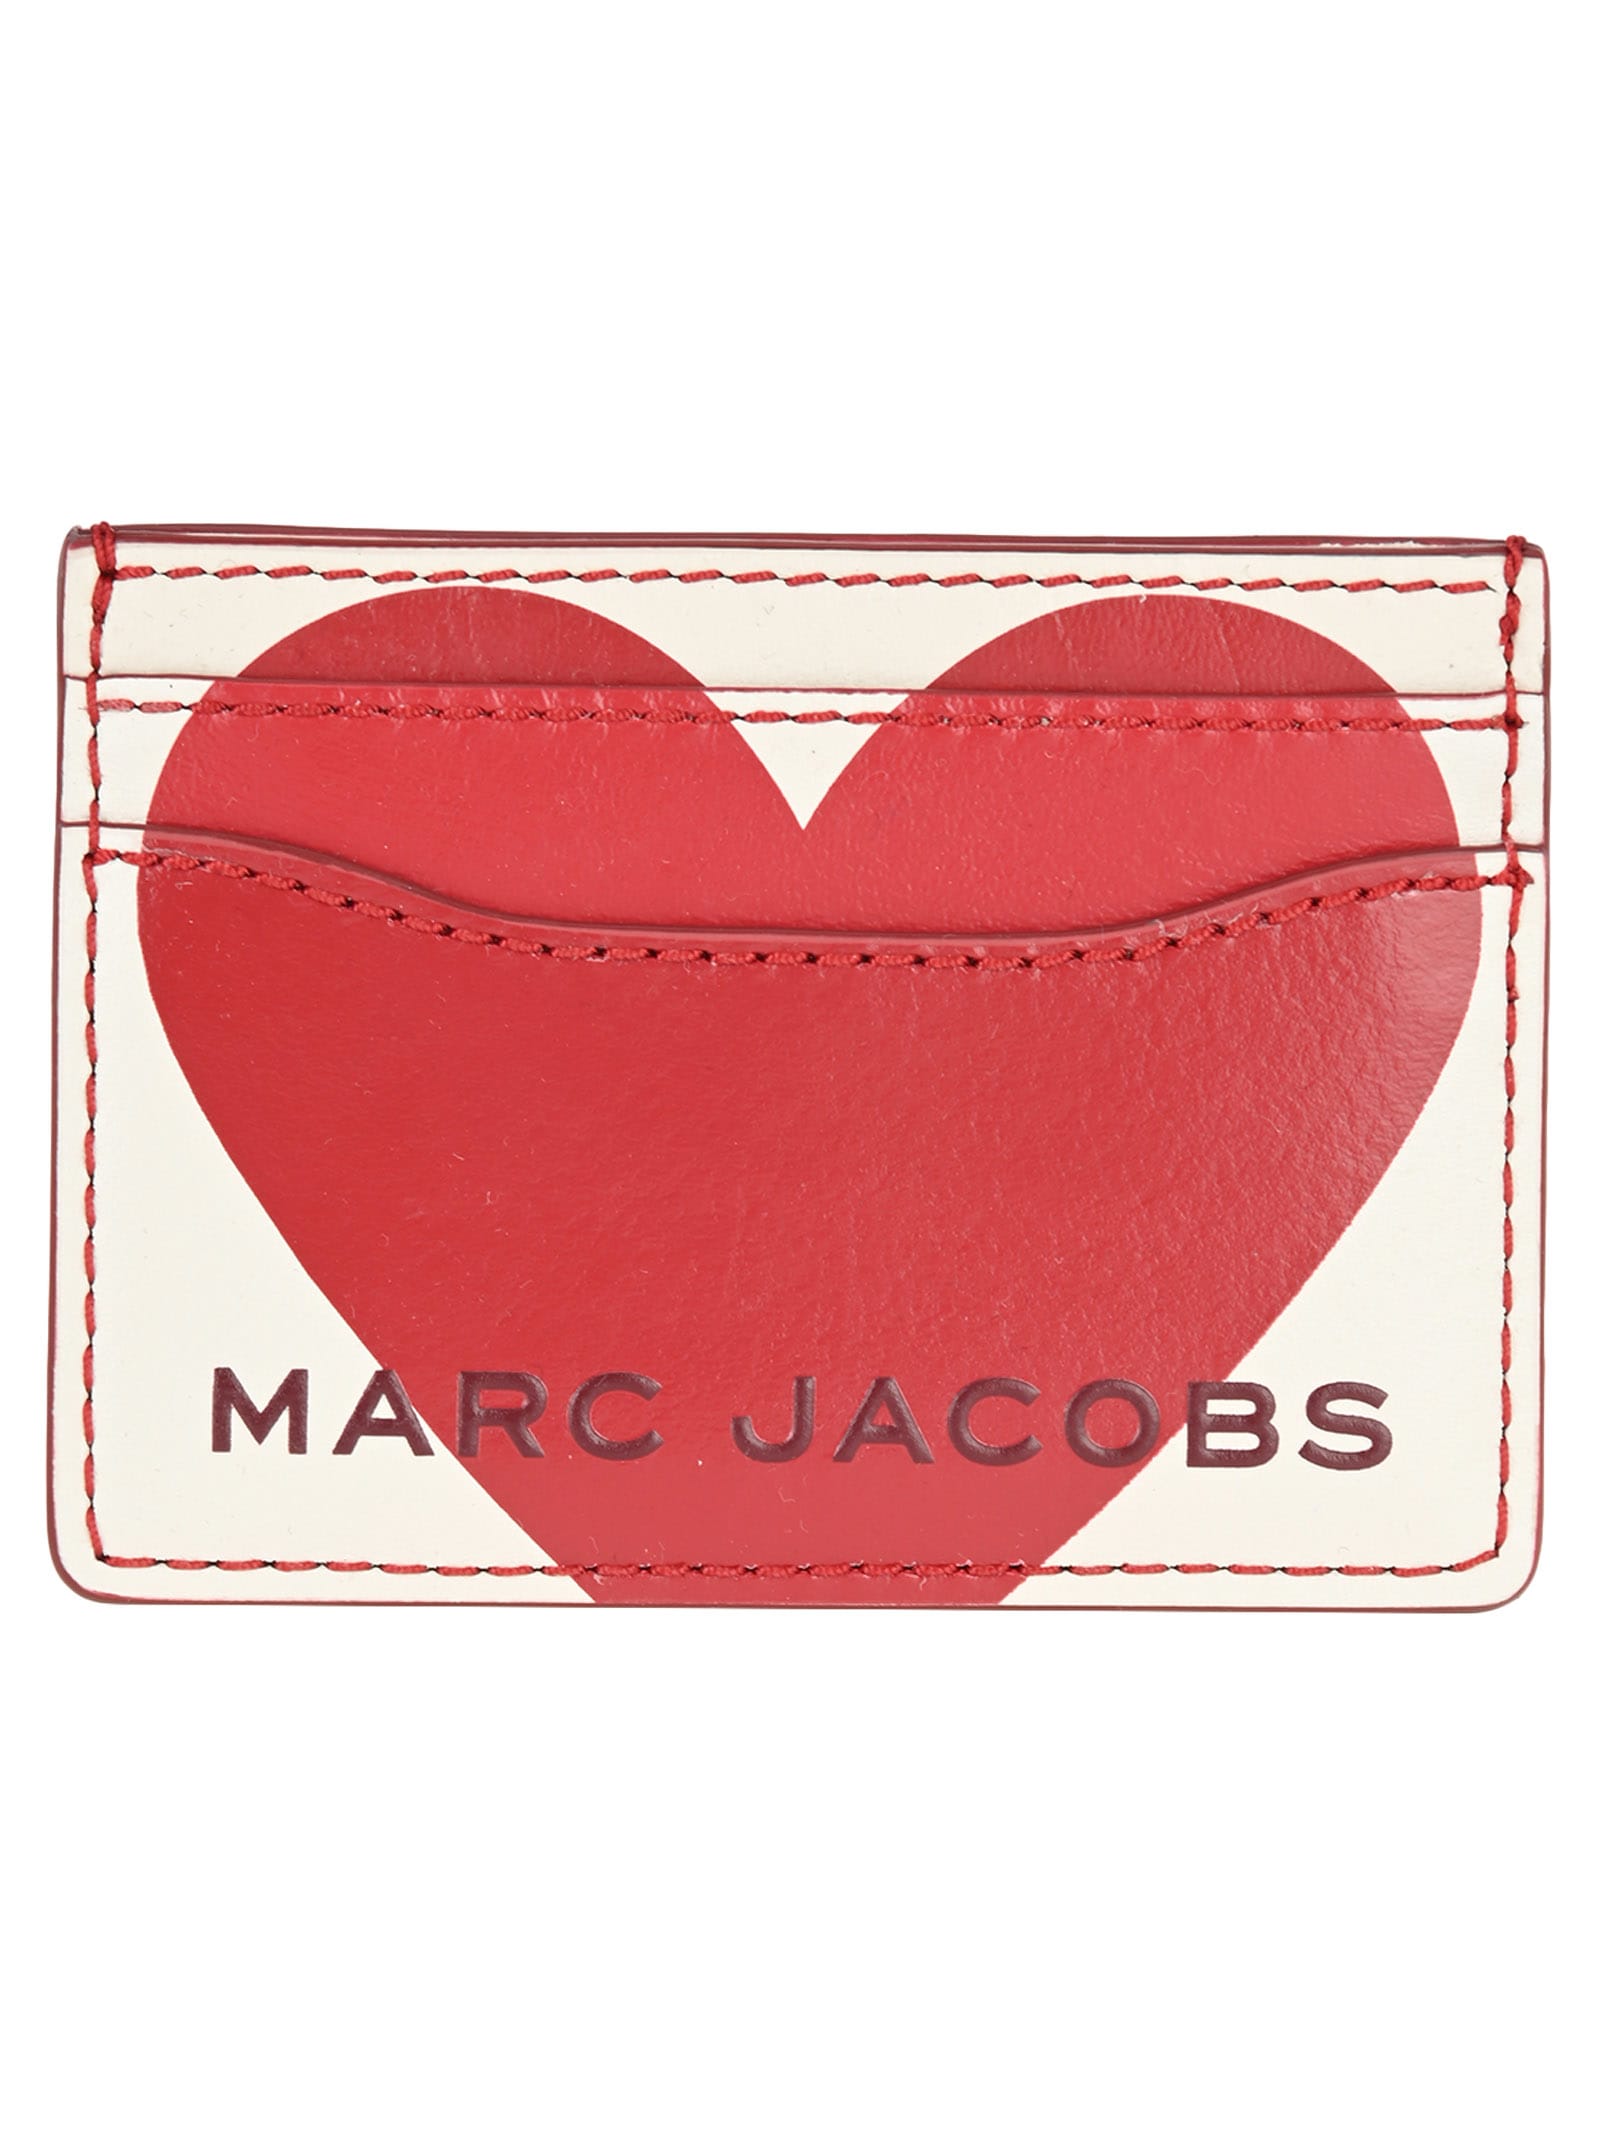 MARC JACOBS THE HEART BOX CARD CASE,11270708